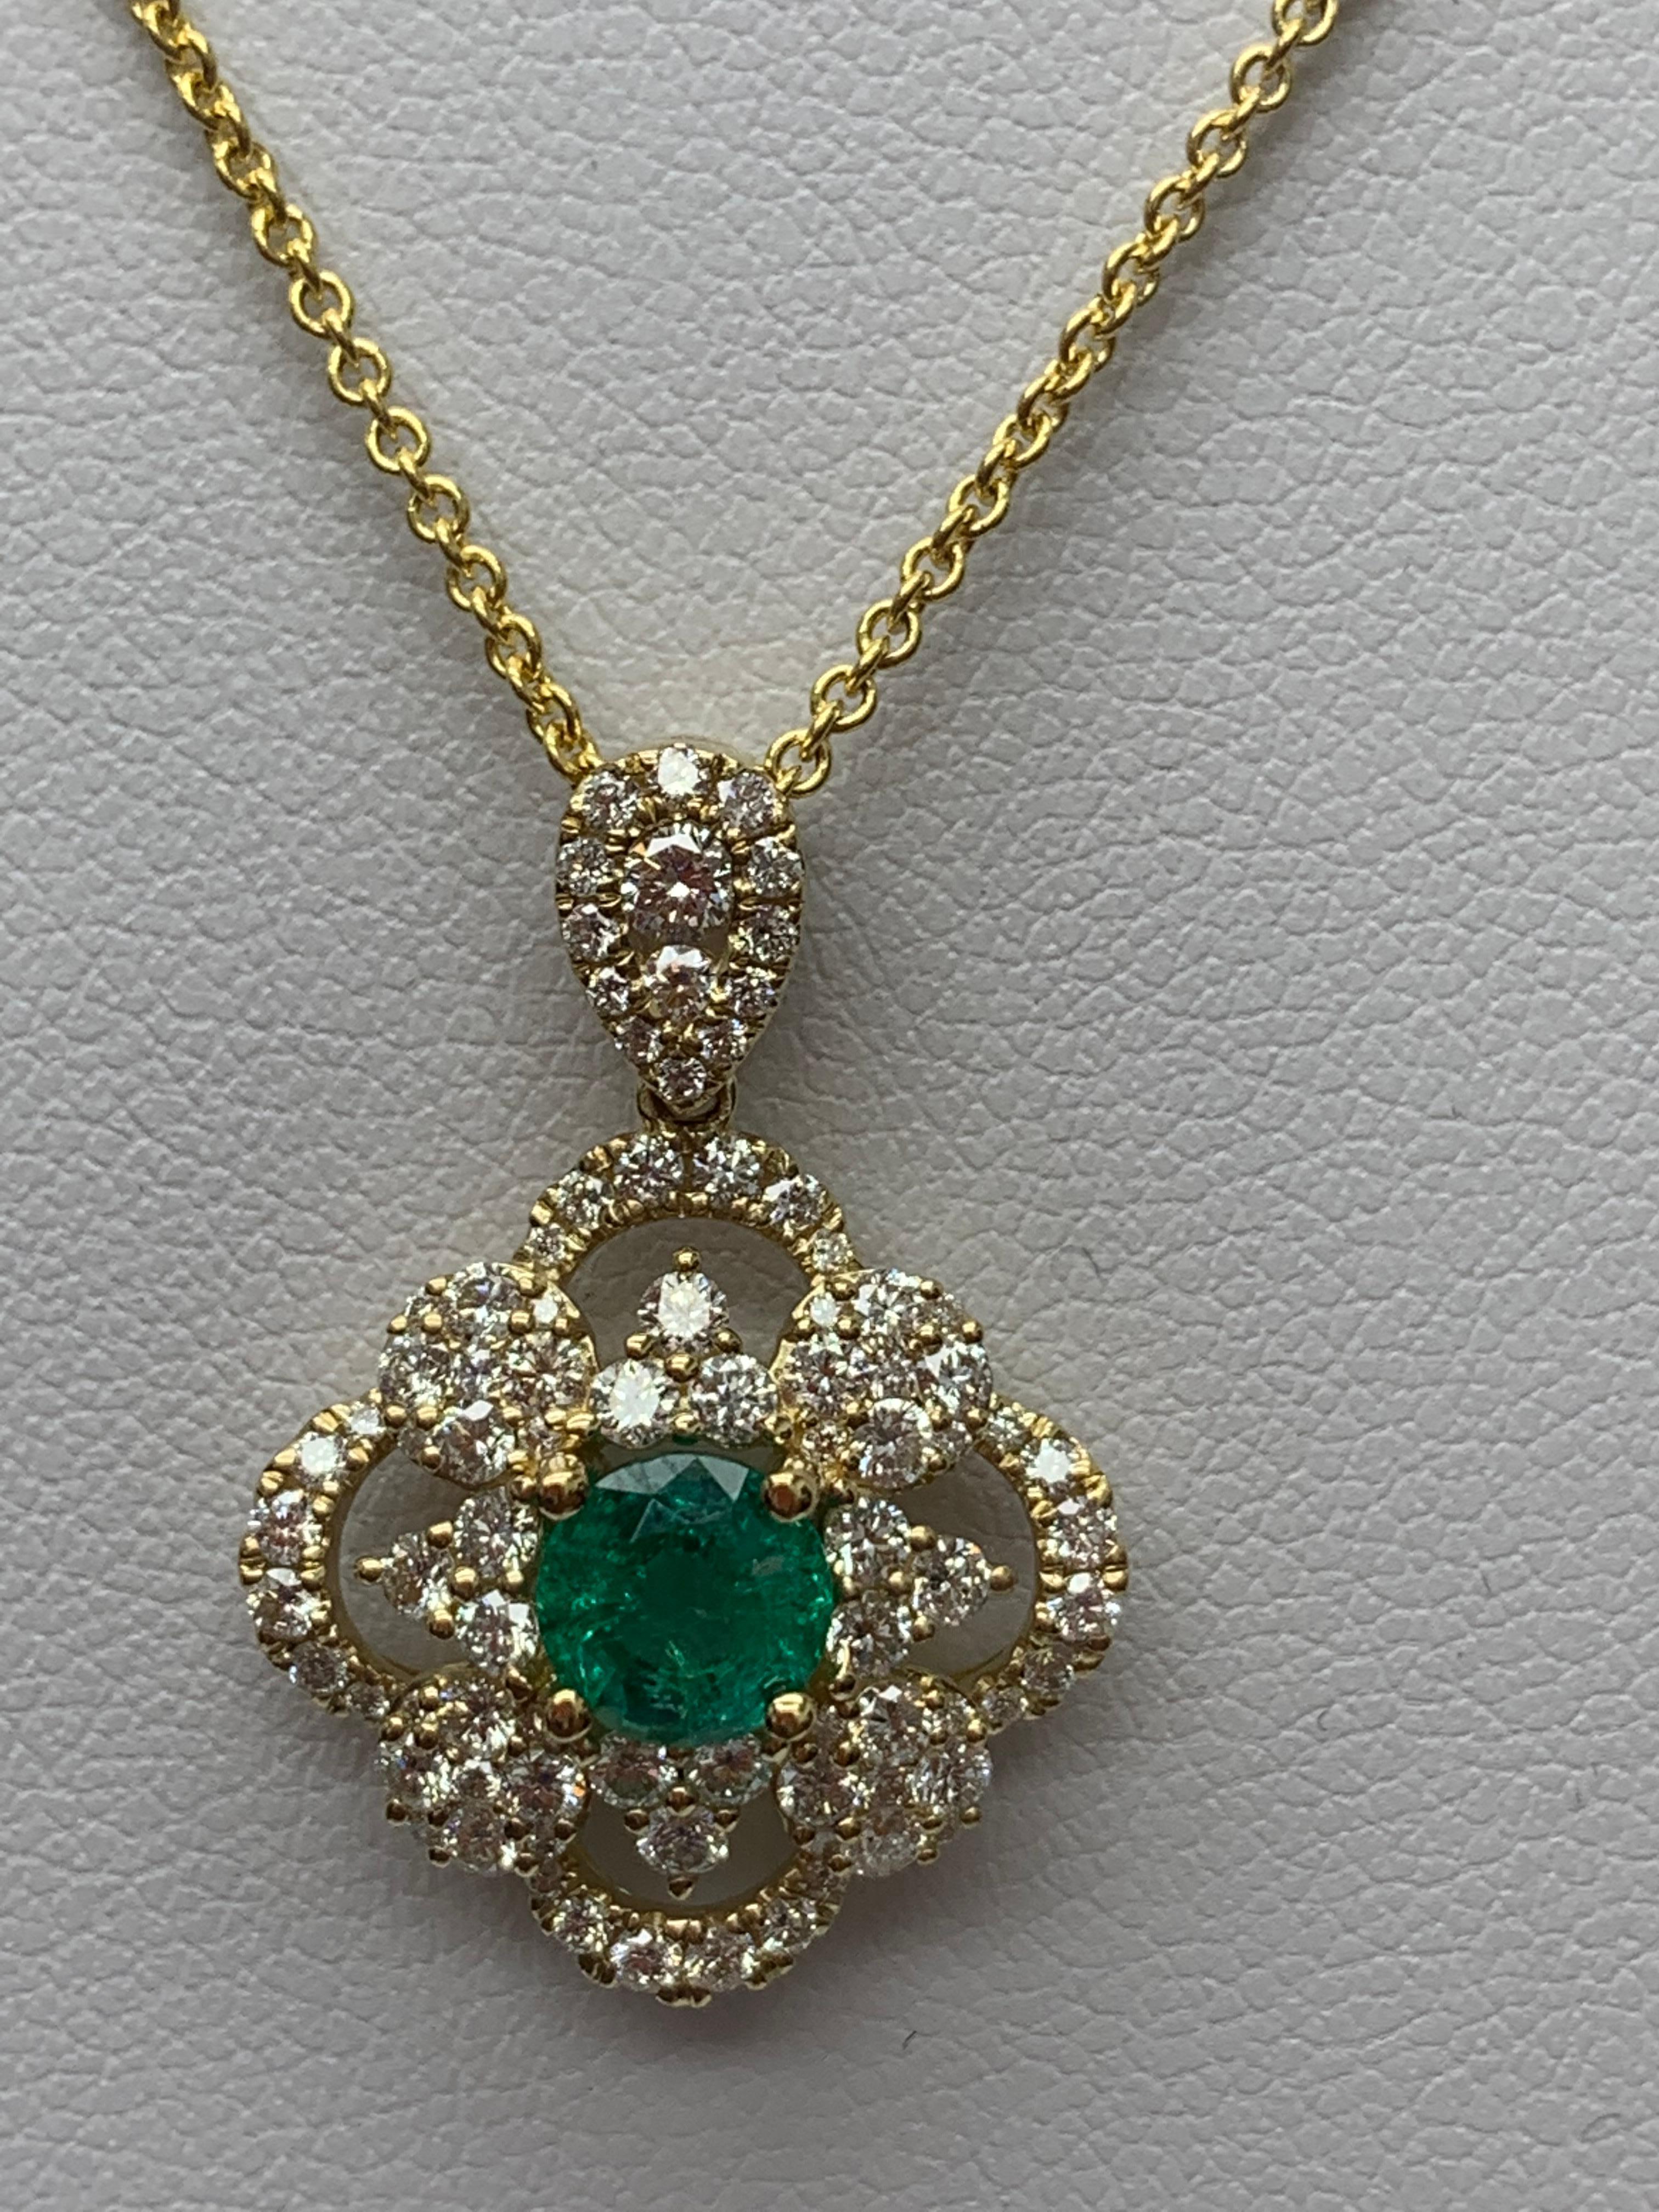 Women's 0.67 Carat Round Cut Emerald and Diamond Pendant Necklace in 18K Yellow Gold For Sale